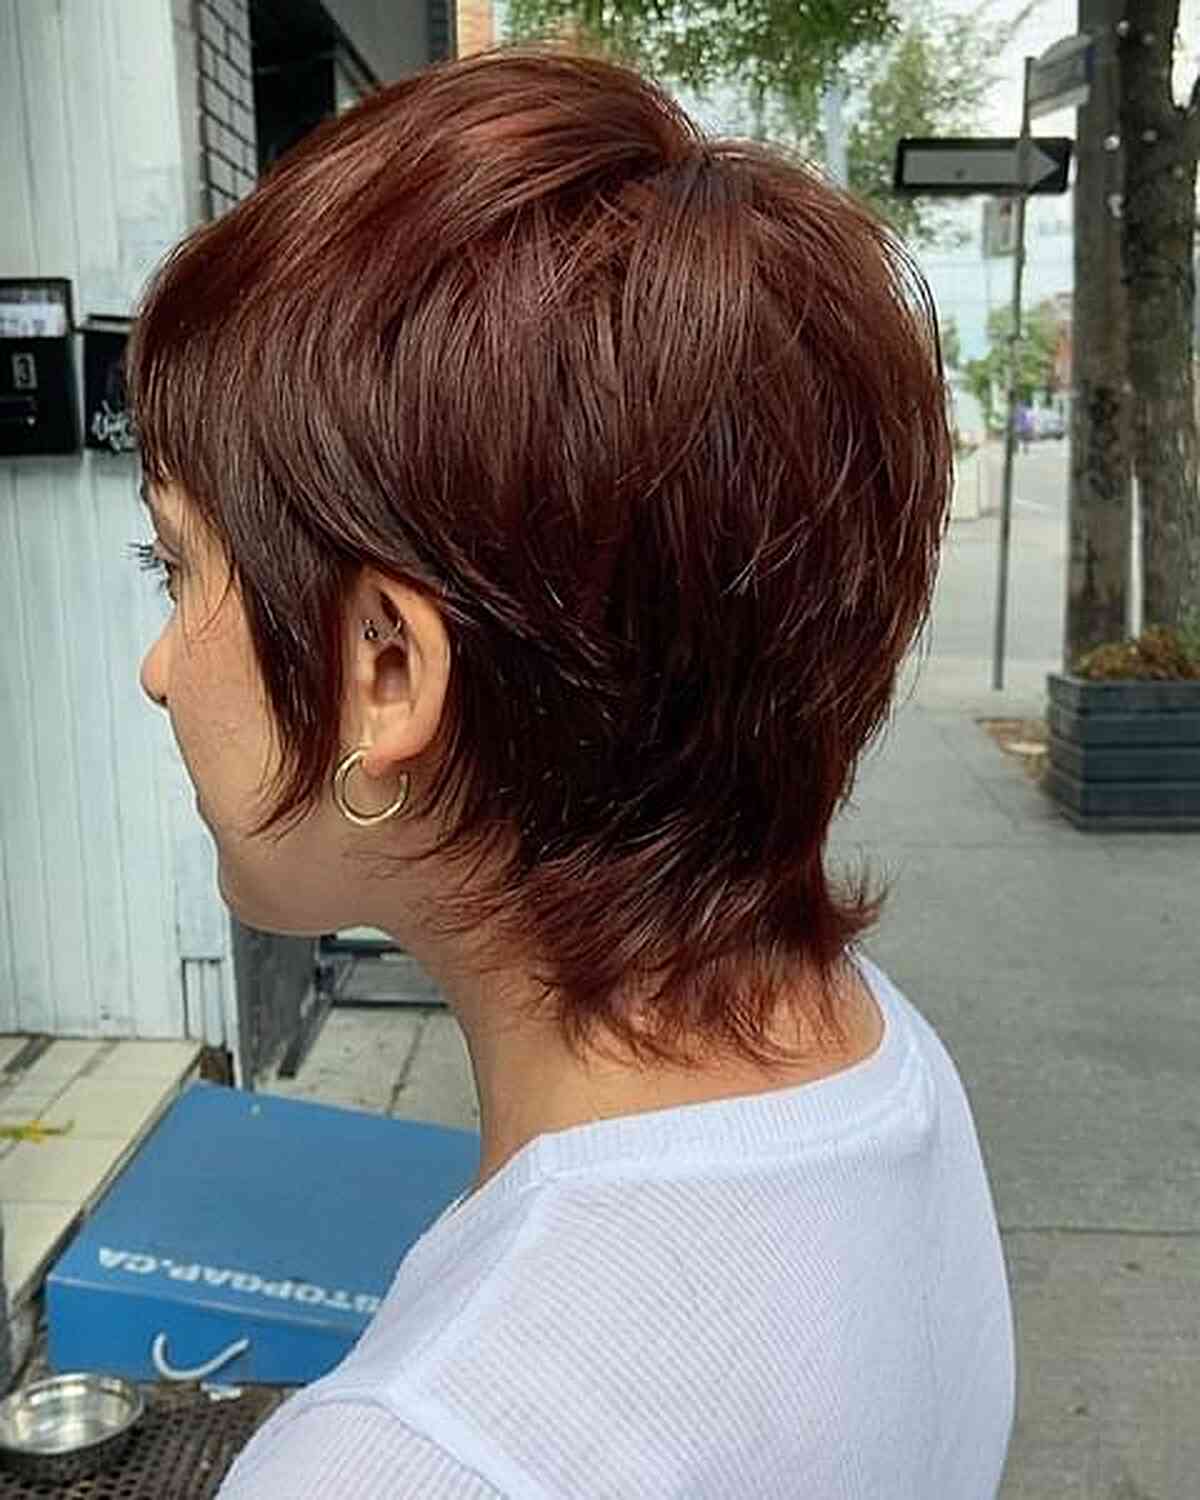 28 Incredible Ways to Get the Wixie Cut Hair Trend